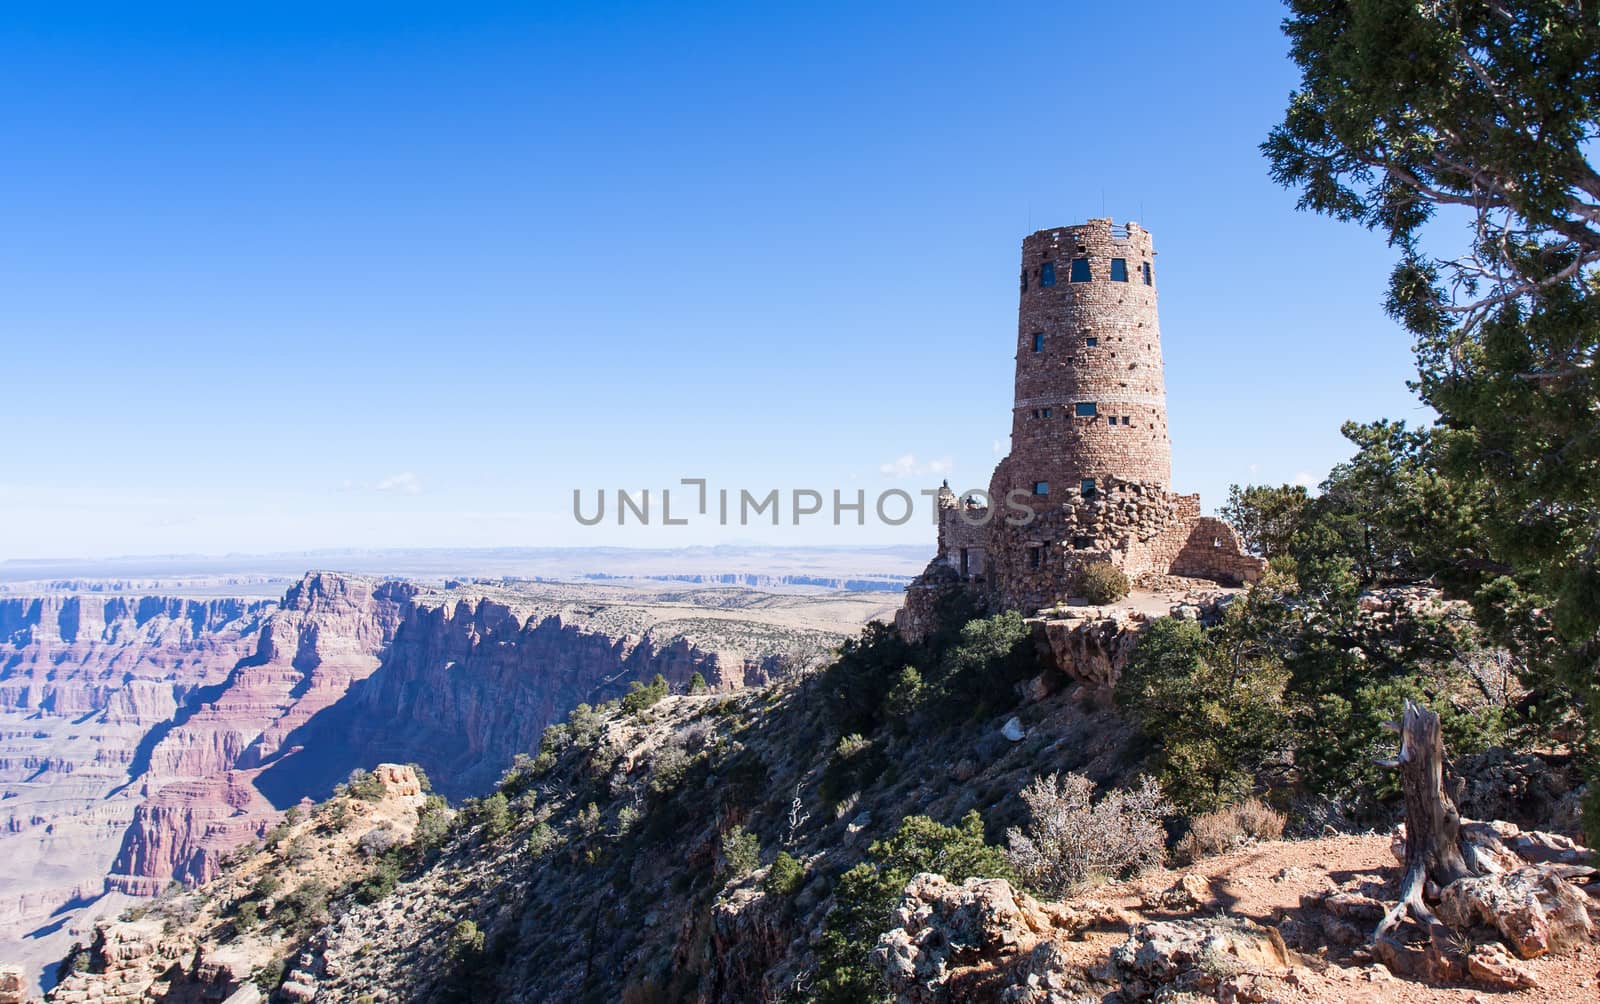 The Watchtower at the Grand Canyon is a replica of Indian watchtowers used to guard against unexpected intruders.